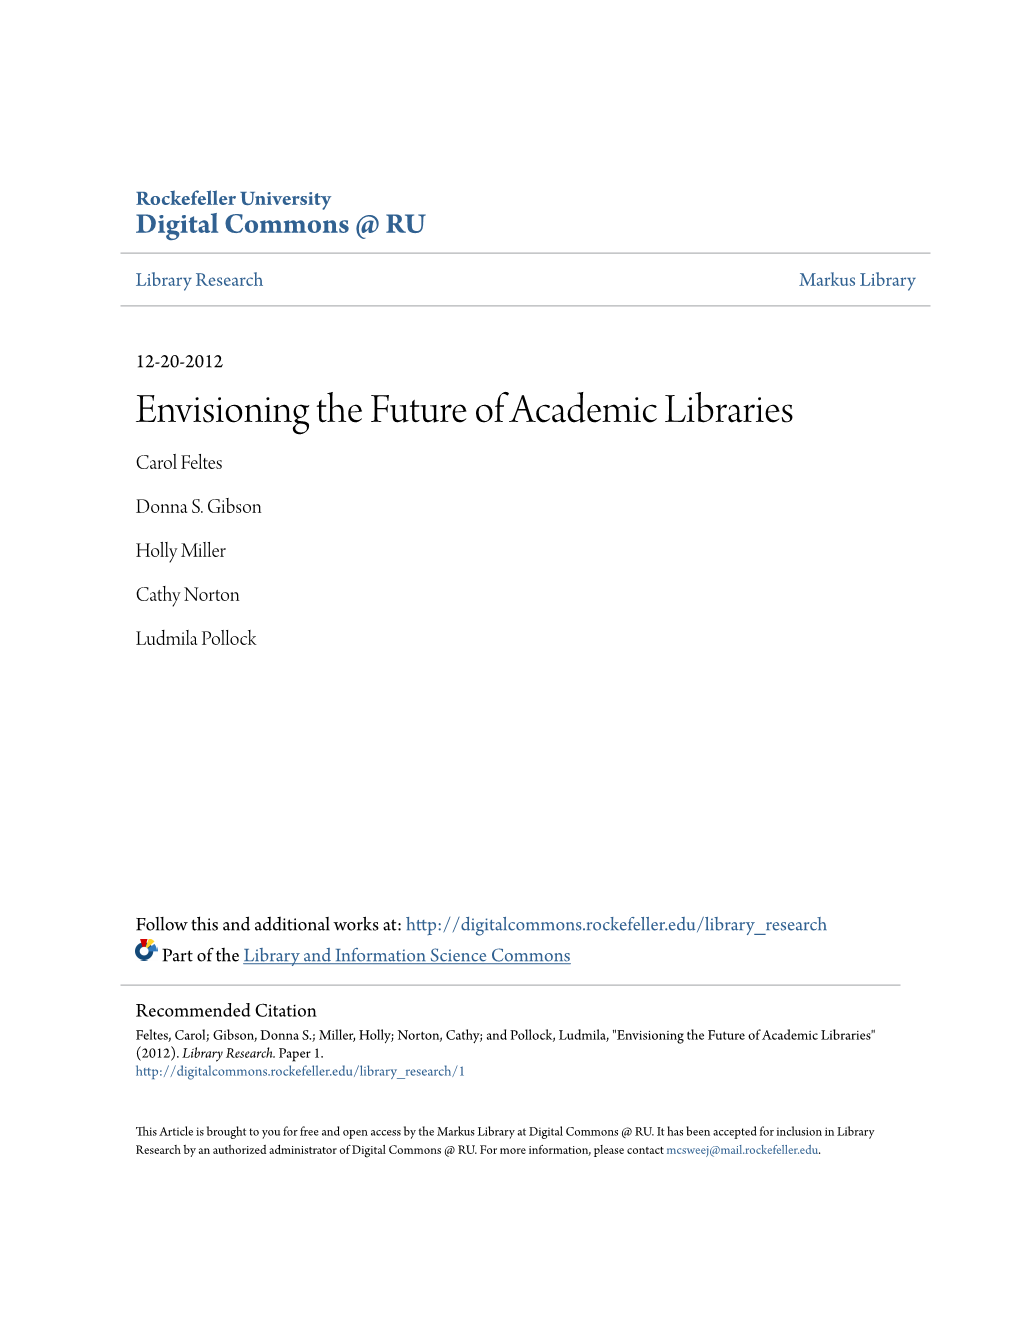 Envisioning the Future of Academic Libraries Carol Feltes